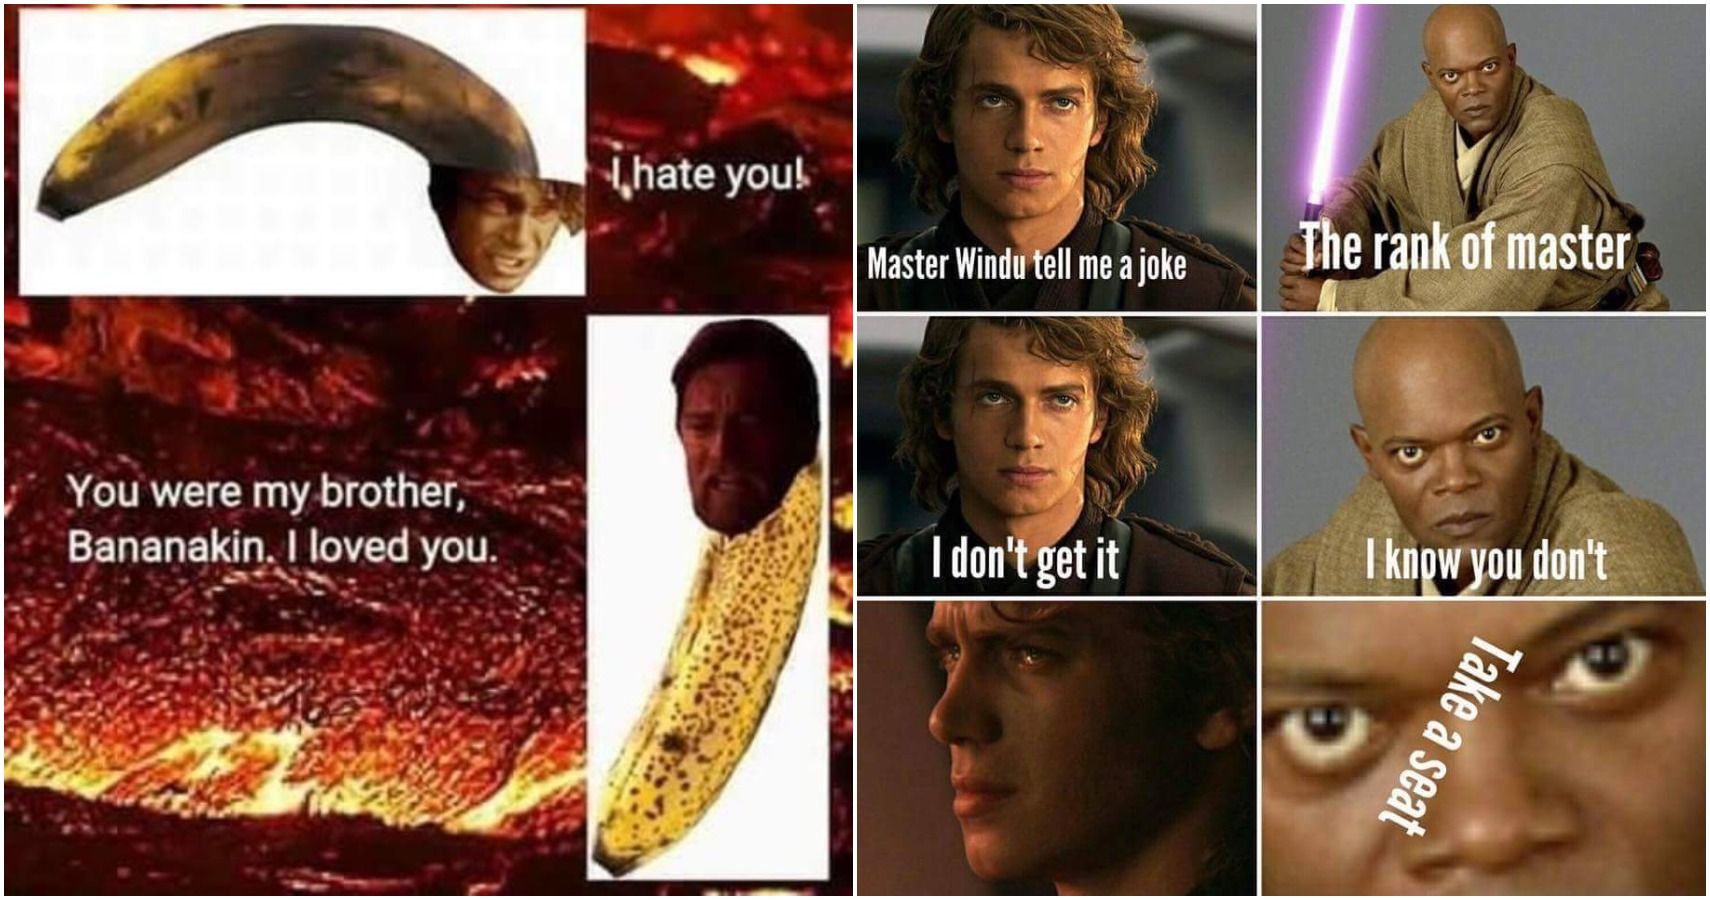 Star Wars 10 Revenge Of The Sith Memes That Are Too Hilarious For Words. 